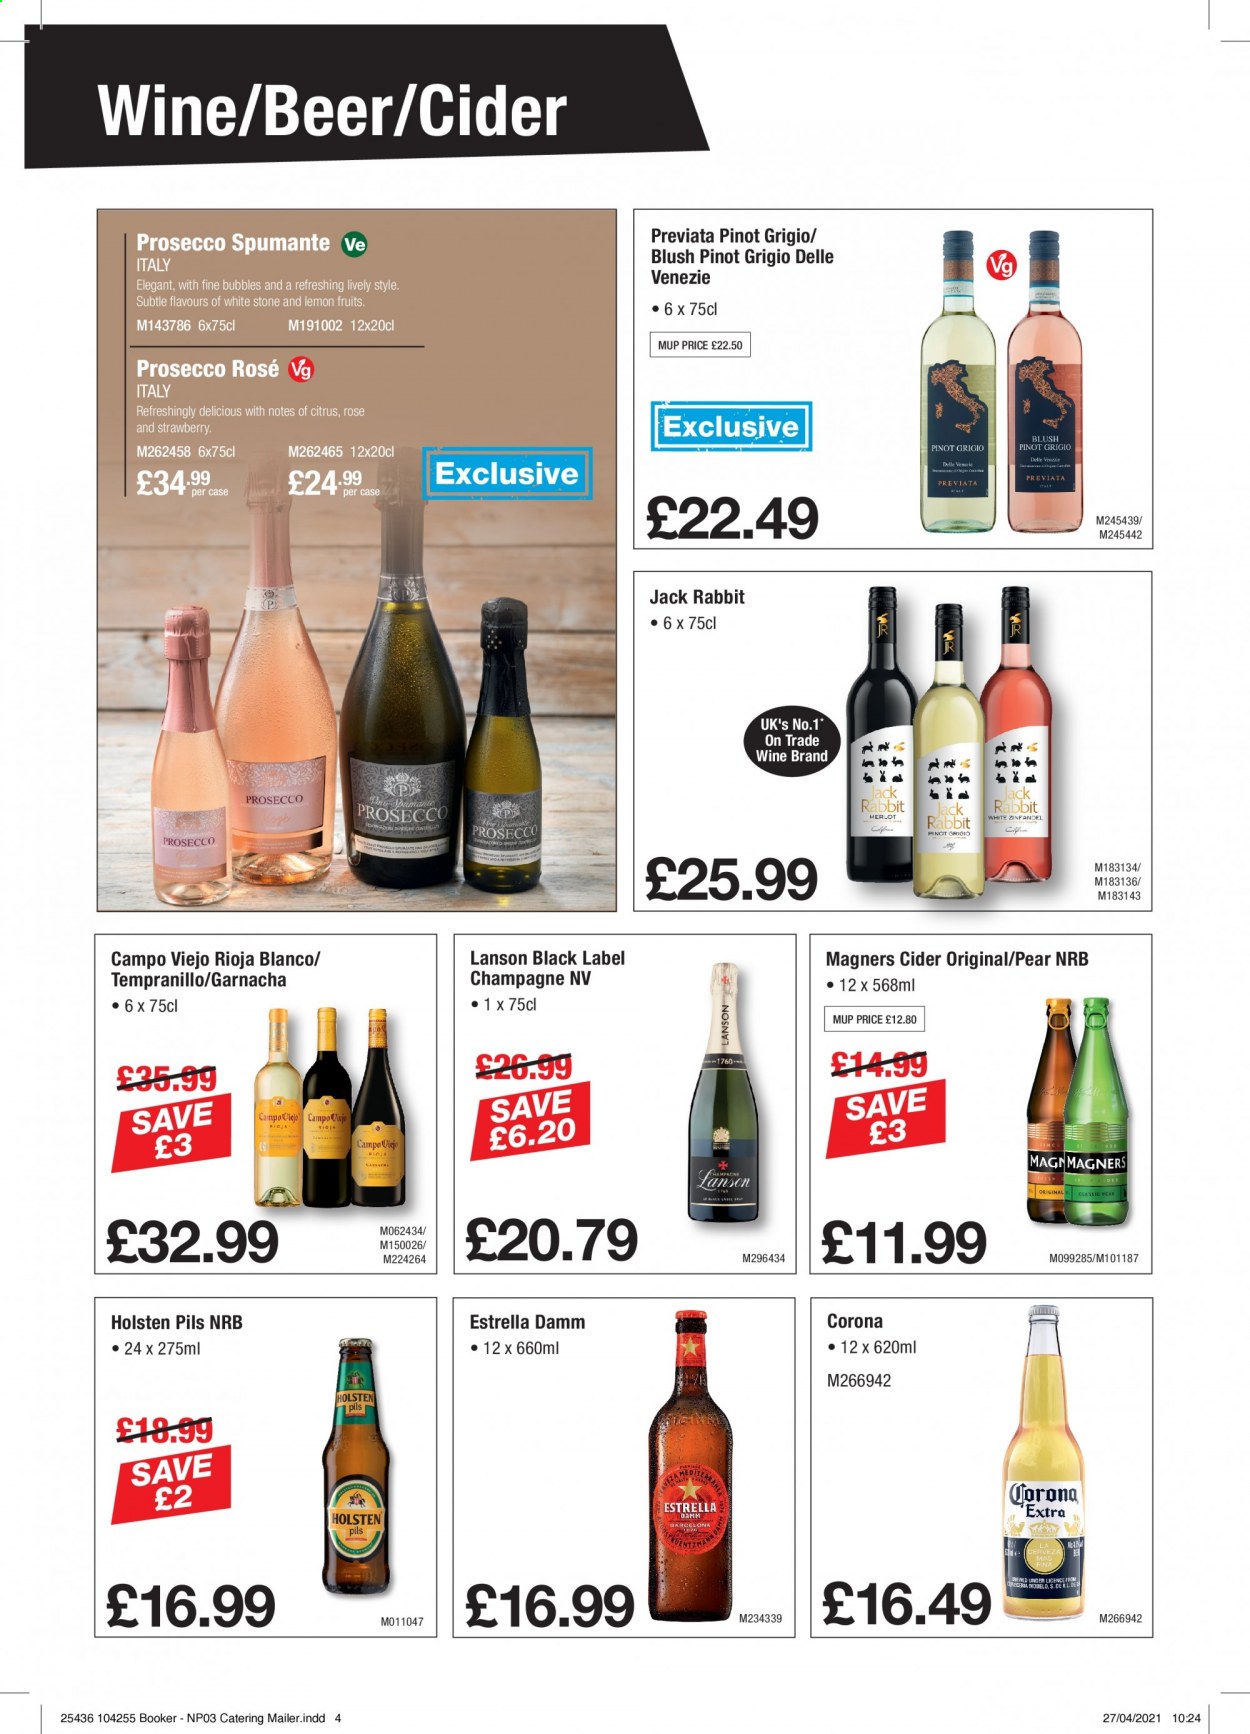 thumbnail - Makro offer  - 11/05/2021 - 01/06/2021 - Sales products - Corona Extra, beer, Holsten, rabbit, red wine, spumante, white wine, champagne, prosecco, wine, Lanson, Campo Viejo, Tempranillo, Pinot Grigio, rosé wine, cider. Page 4.